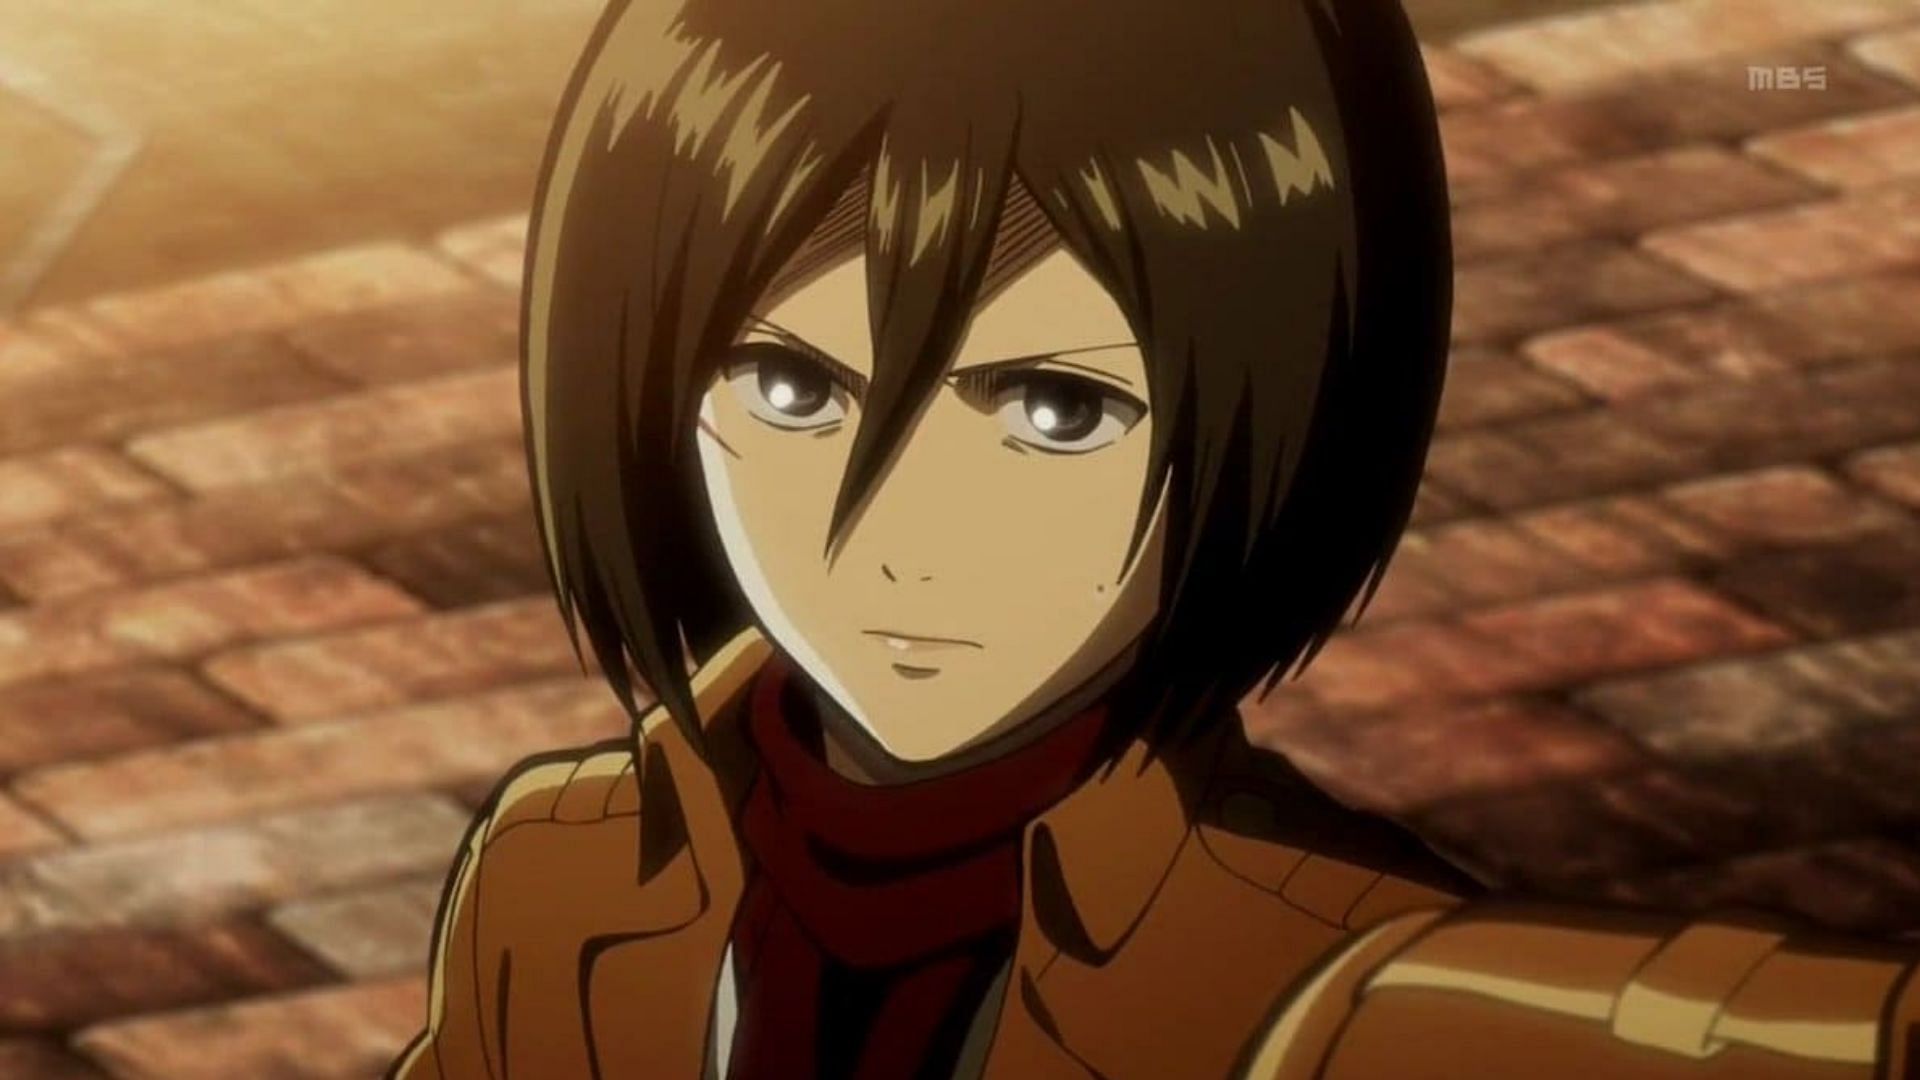 Levy and Eren are also good characters, but Mikasa is cool in her own right (Image via Wit Studio)